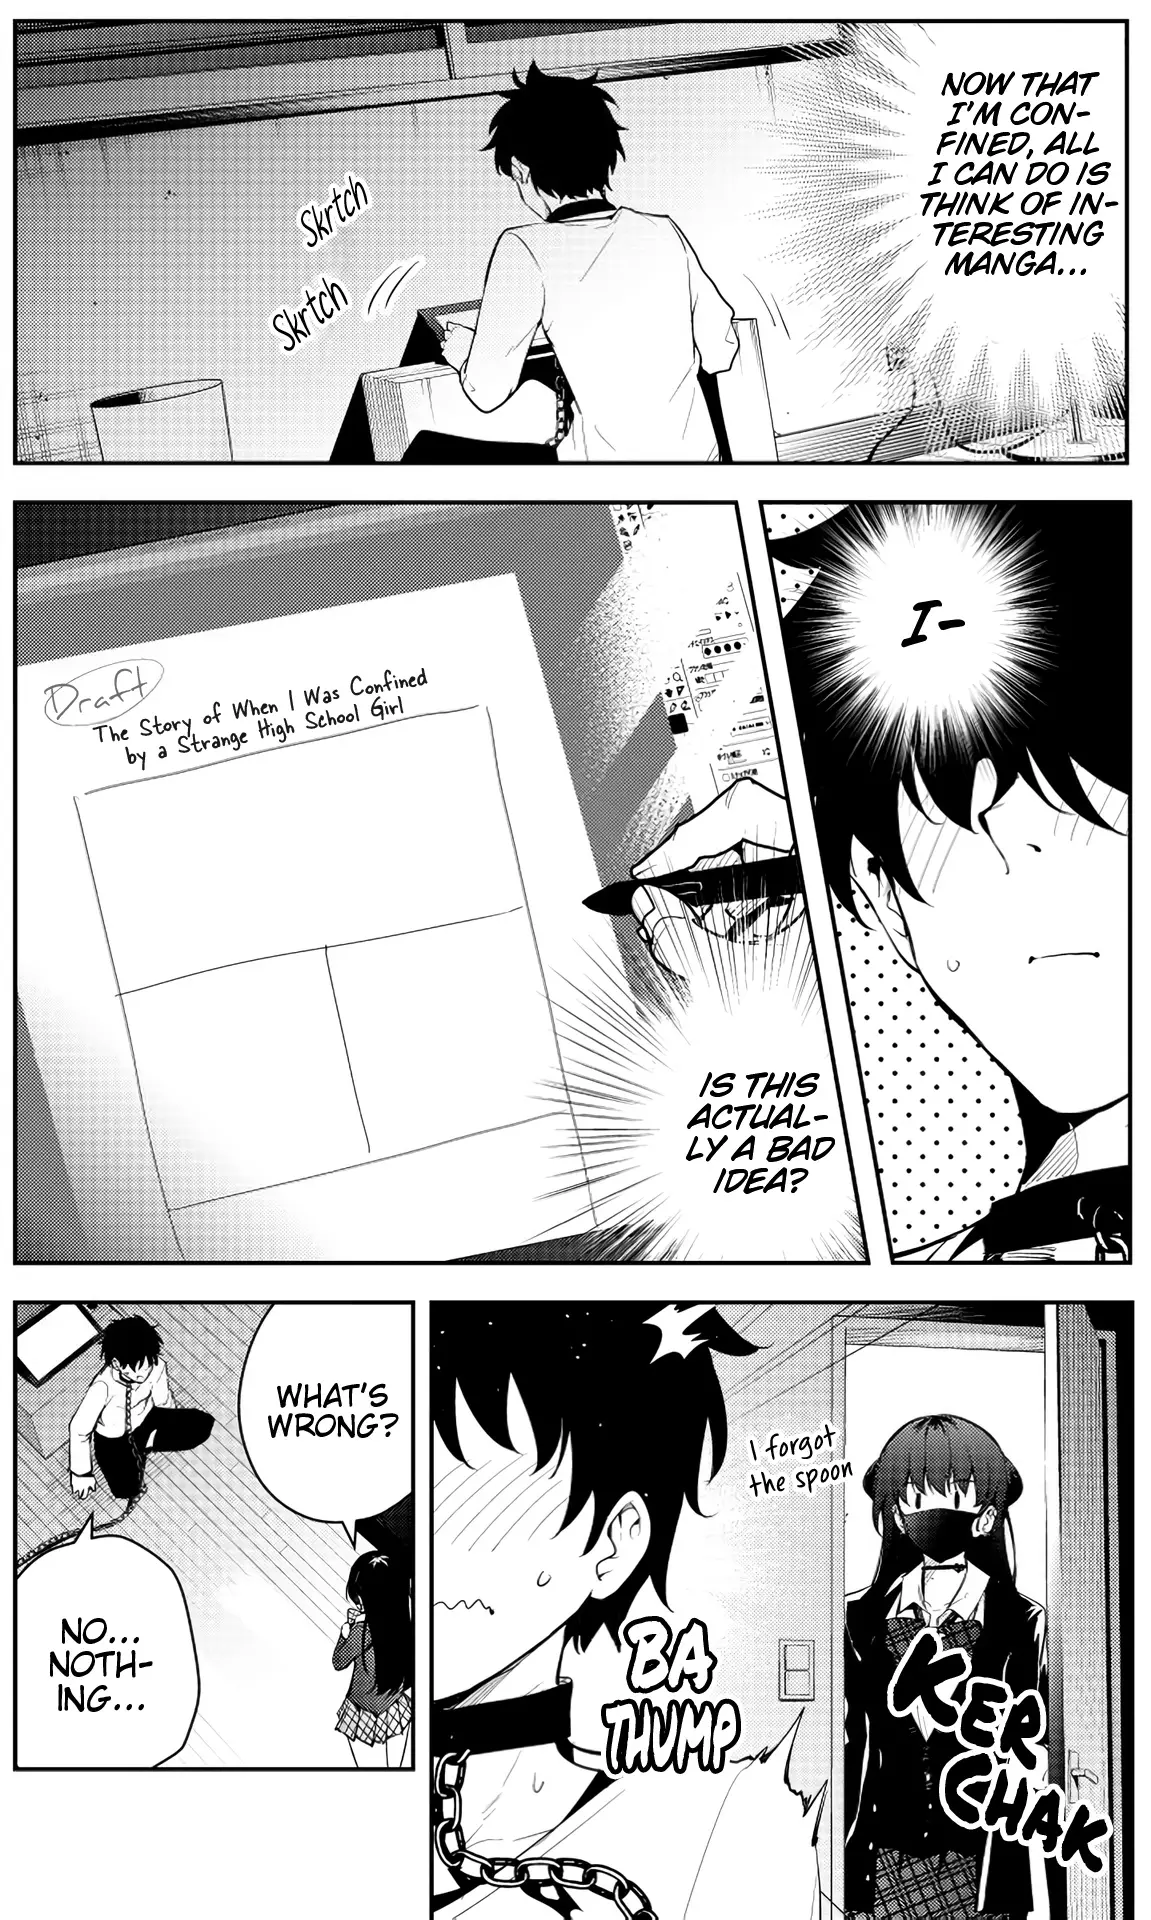 The Story Of A Manga Artist Confined By A Strange High School Girl - 11 page 3-8523120d